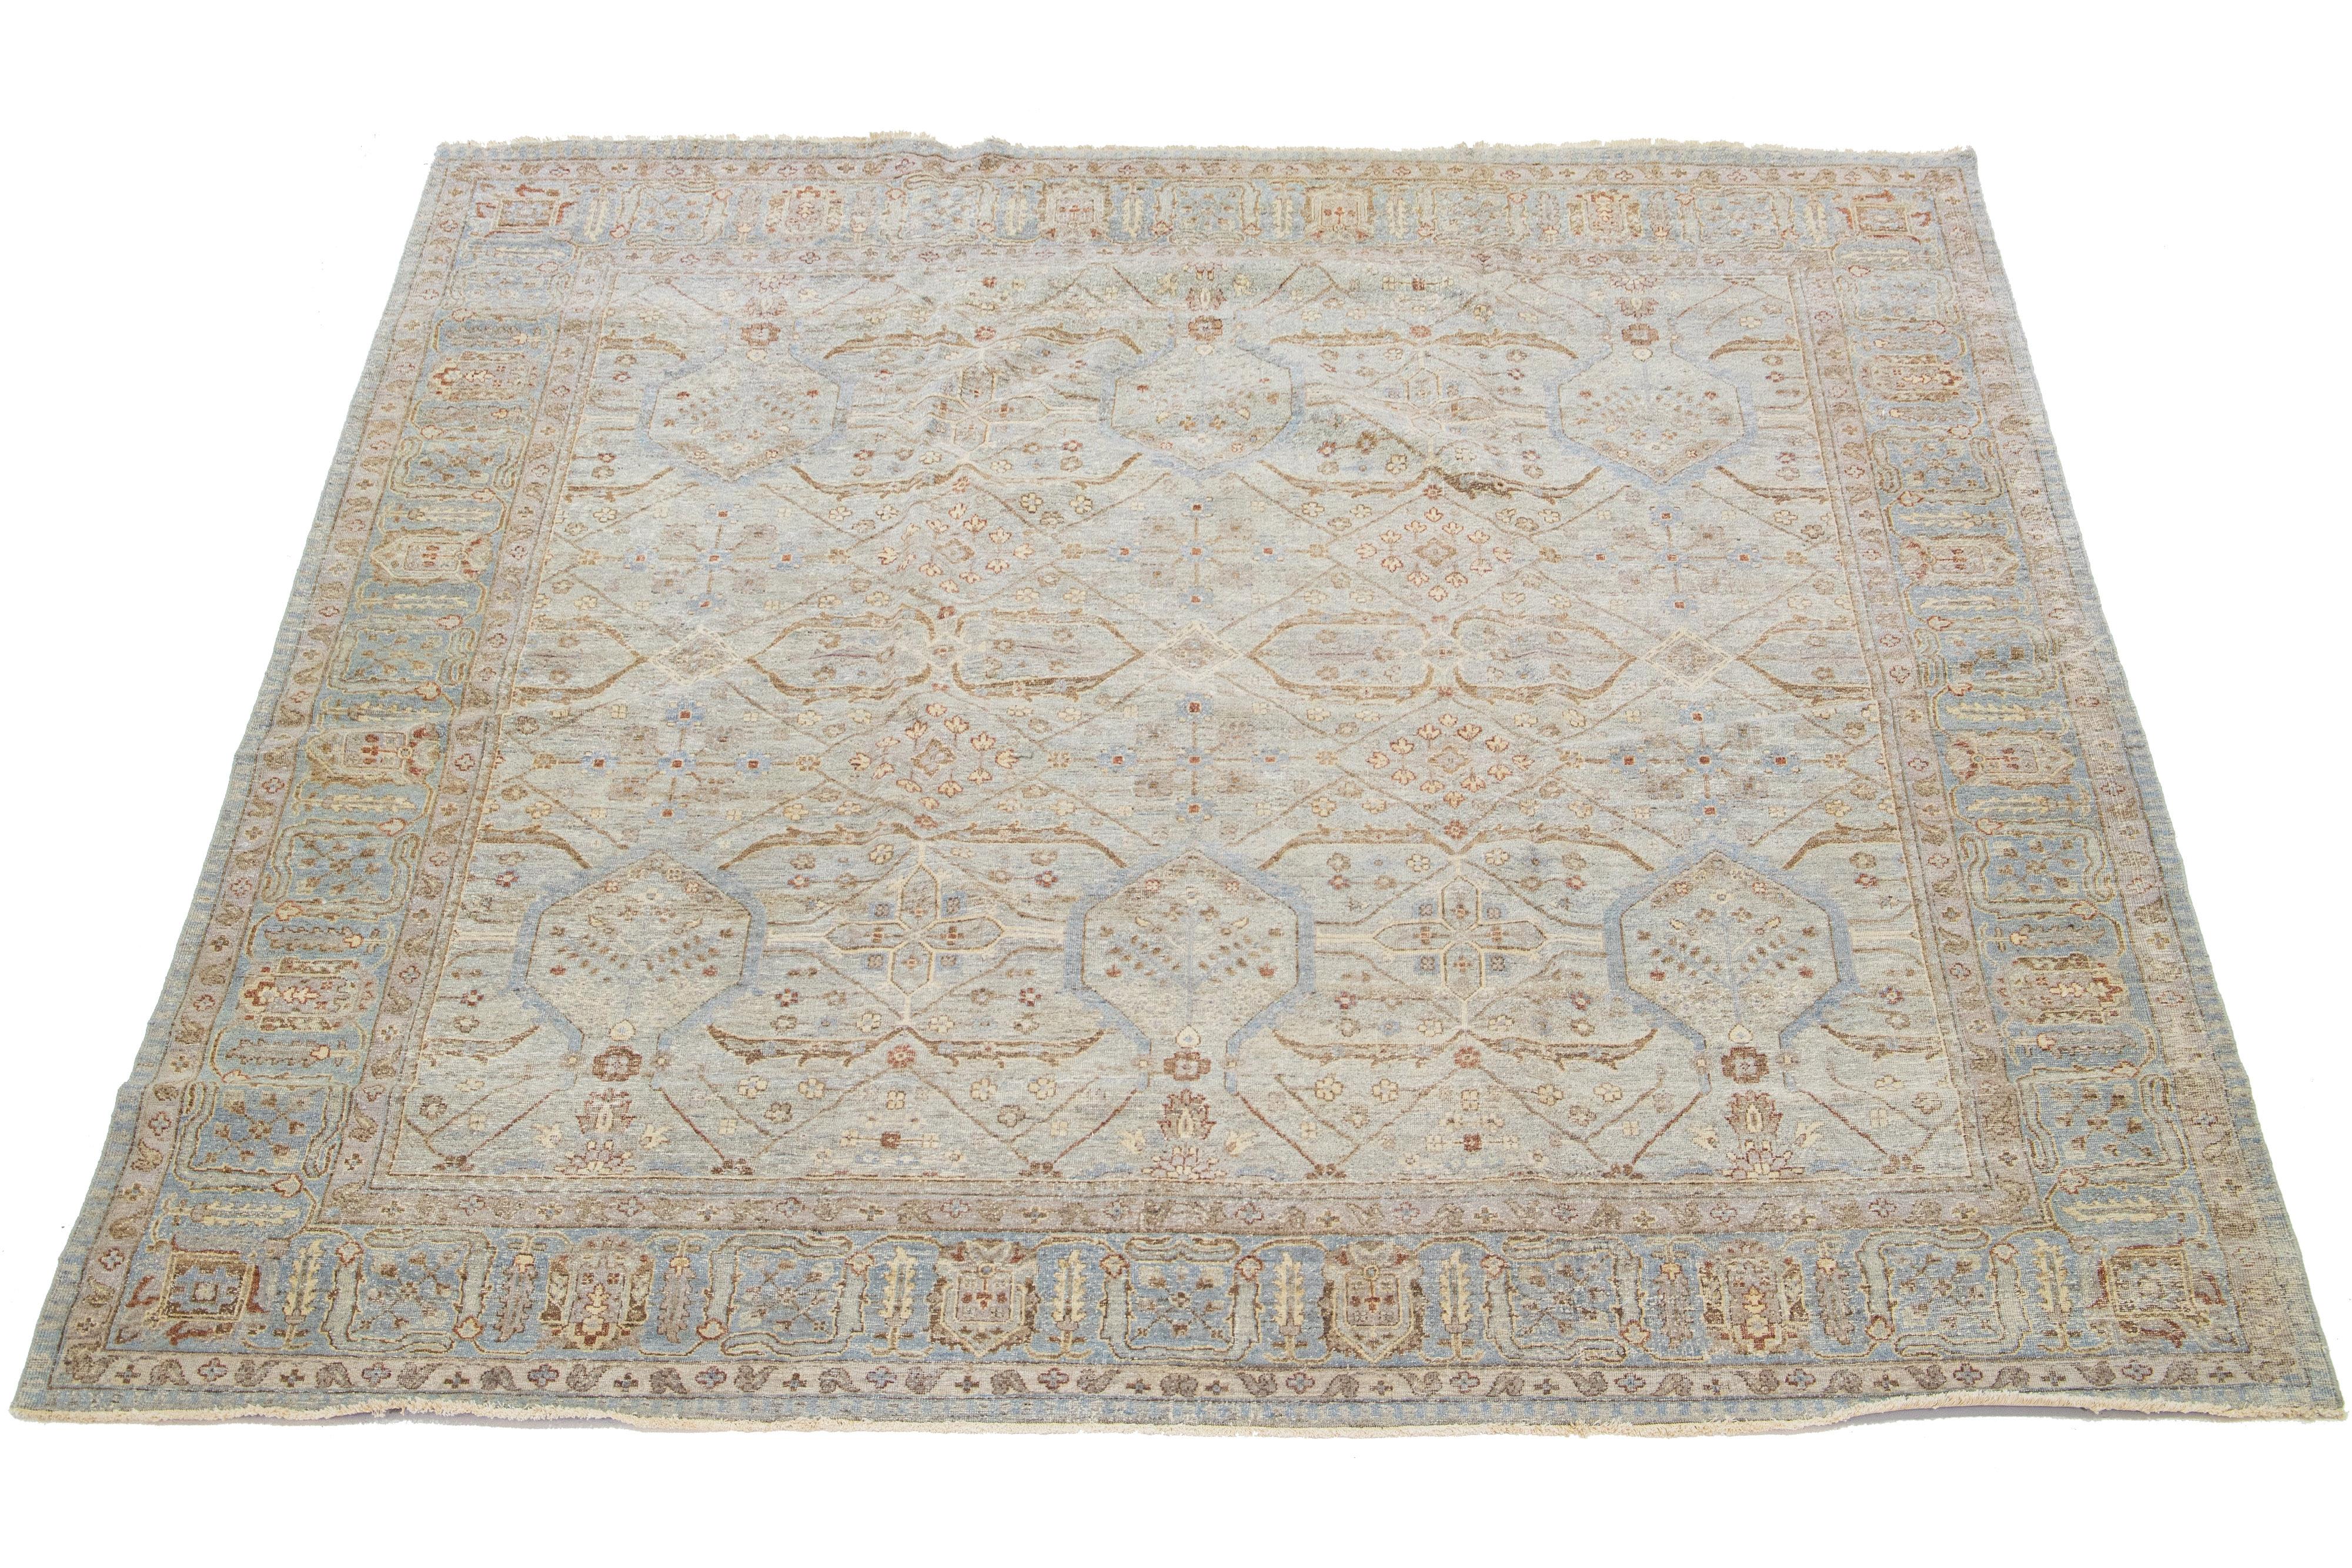 Modern Indian Handmade Geometric Wool Rug In Light Gray by Apadana In New Condition For Sale In Norwalk, CT